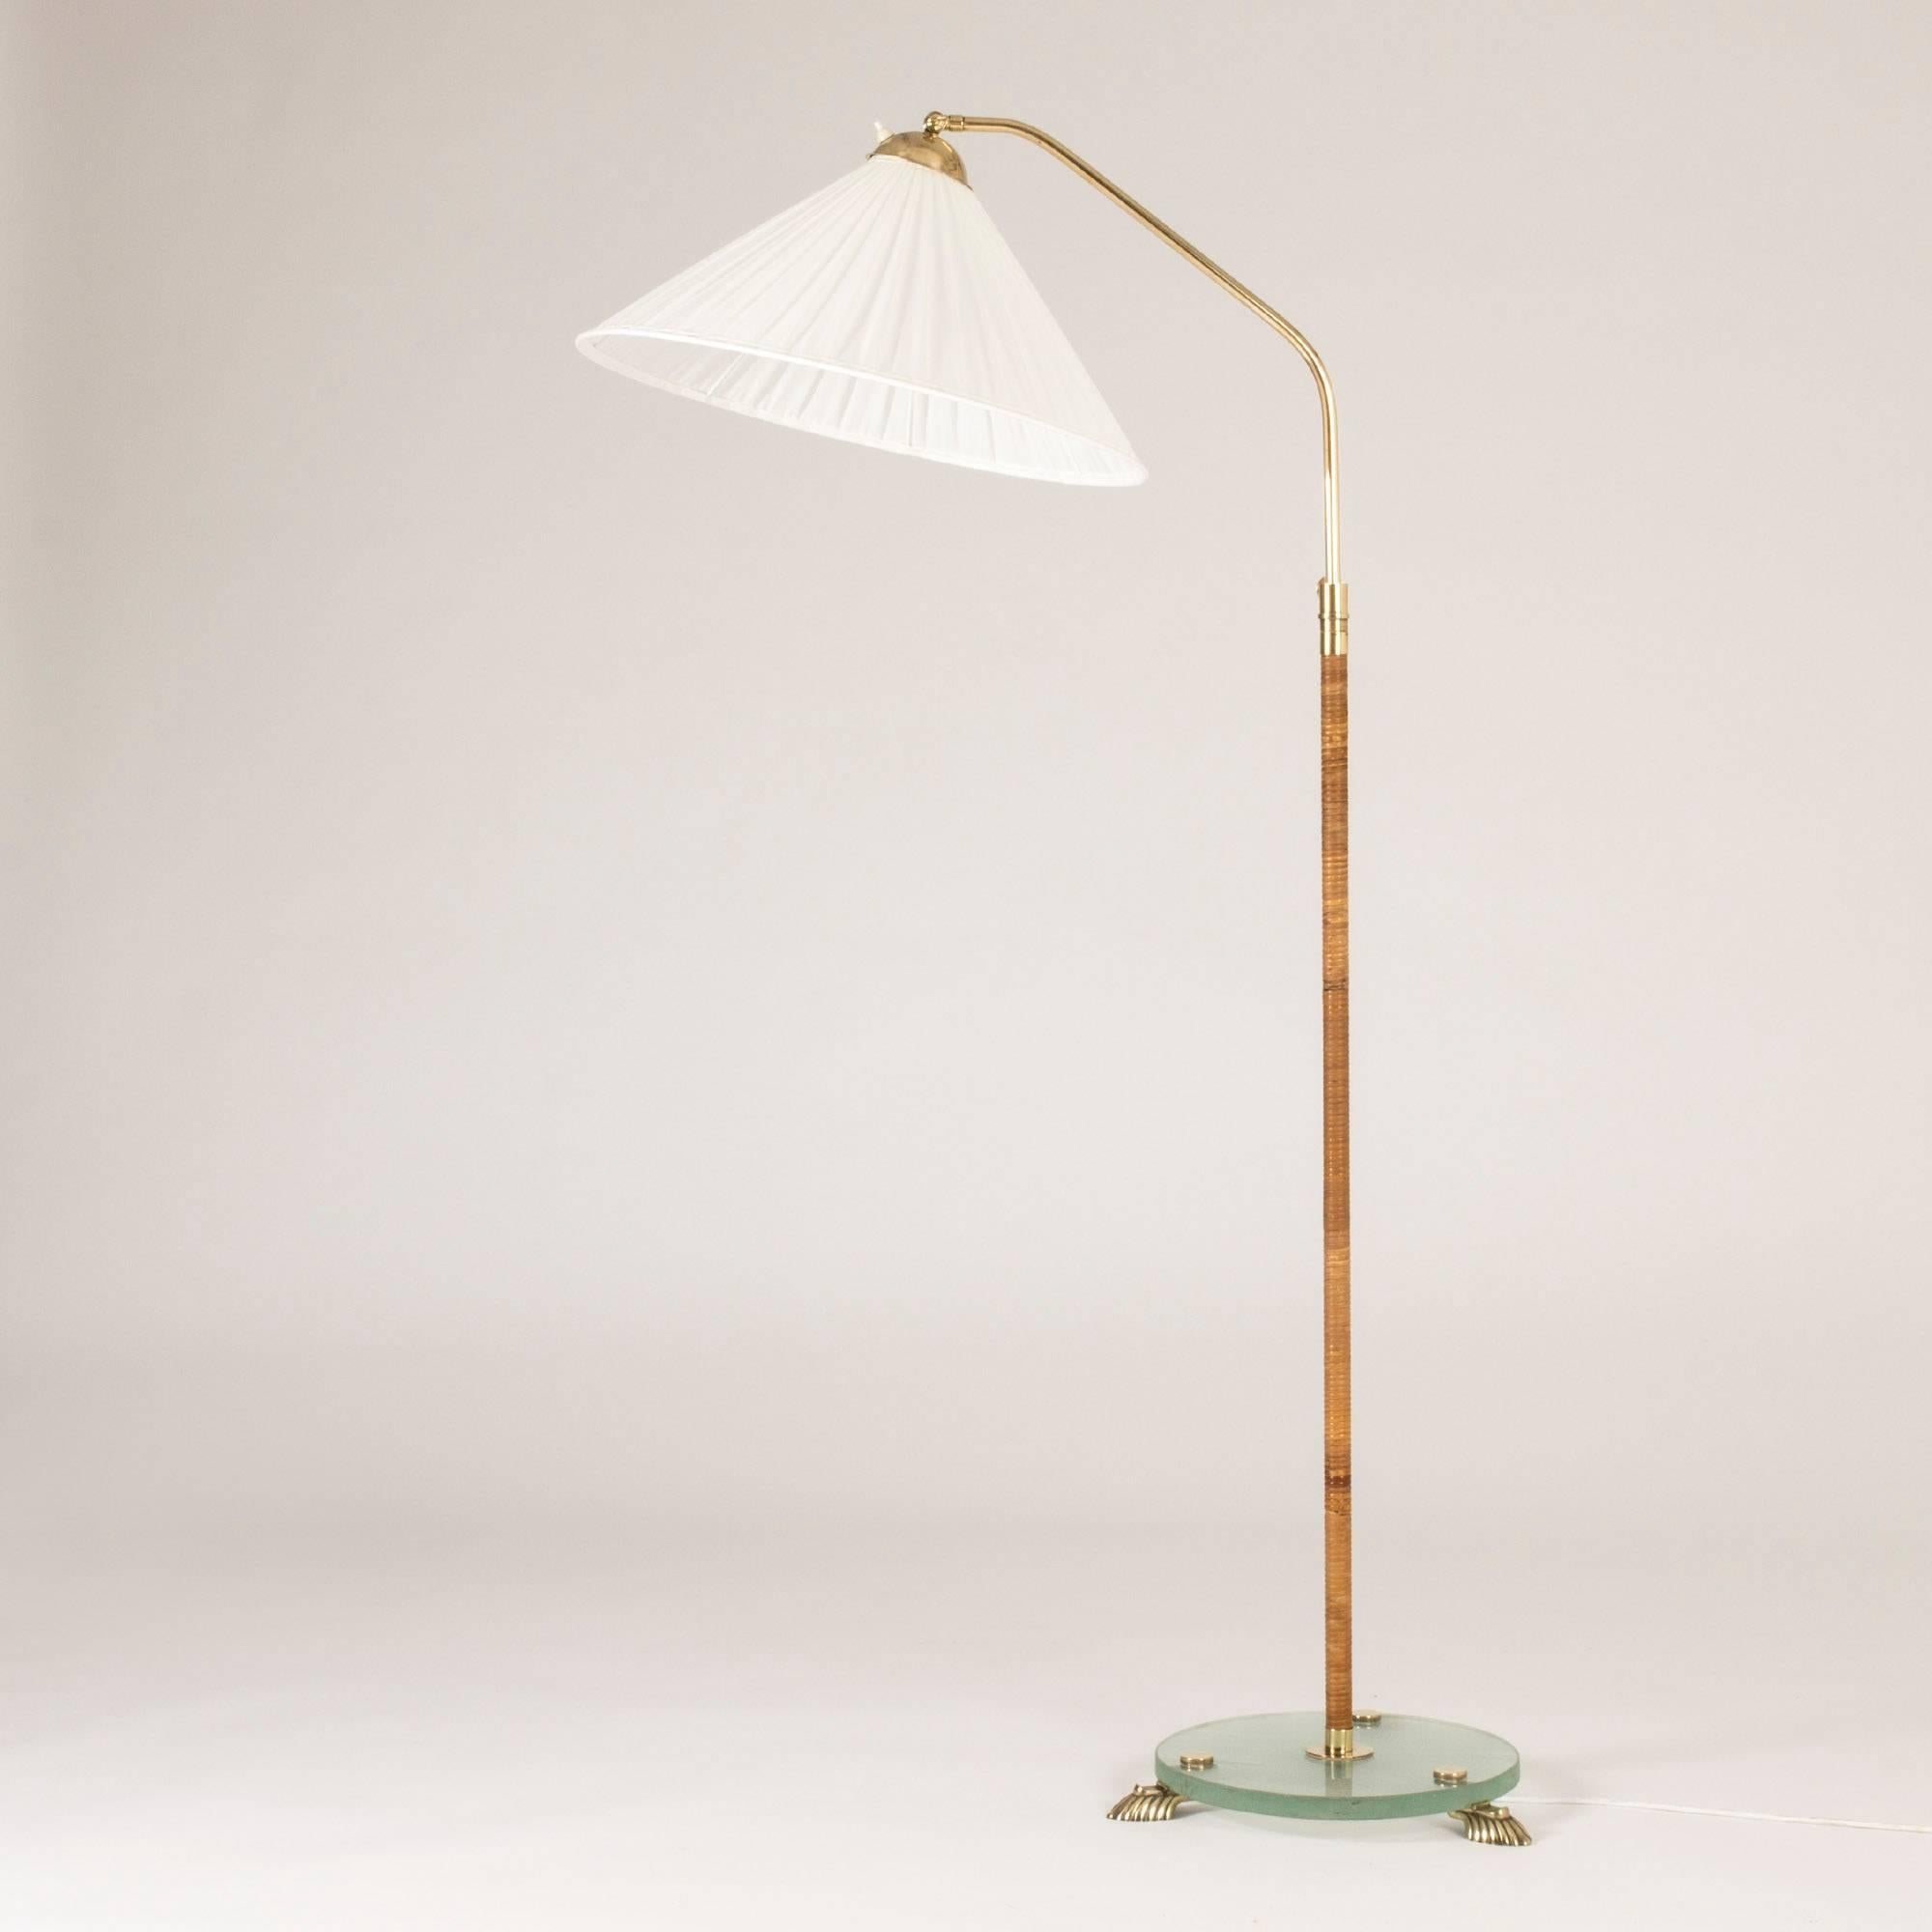 Beautiful floor lamp, made in Sweden in the 1930s. Made with a frosted glass base and brass lions’ feet and rattan wound brass handle. Lovely, refined design and details.